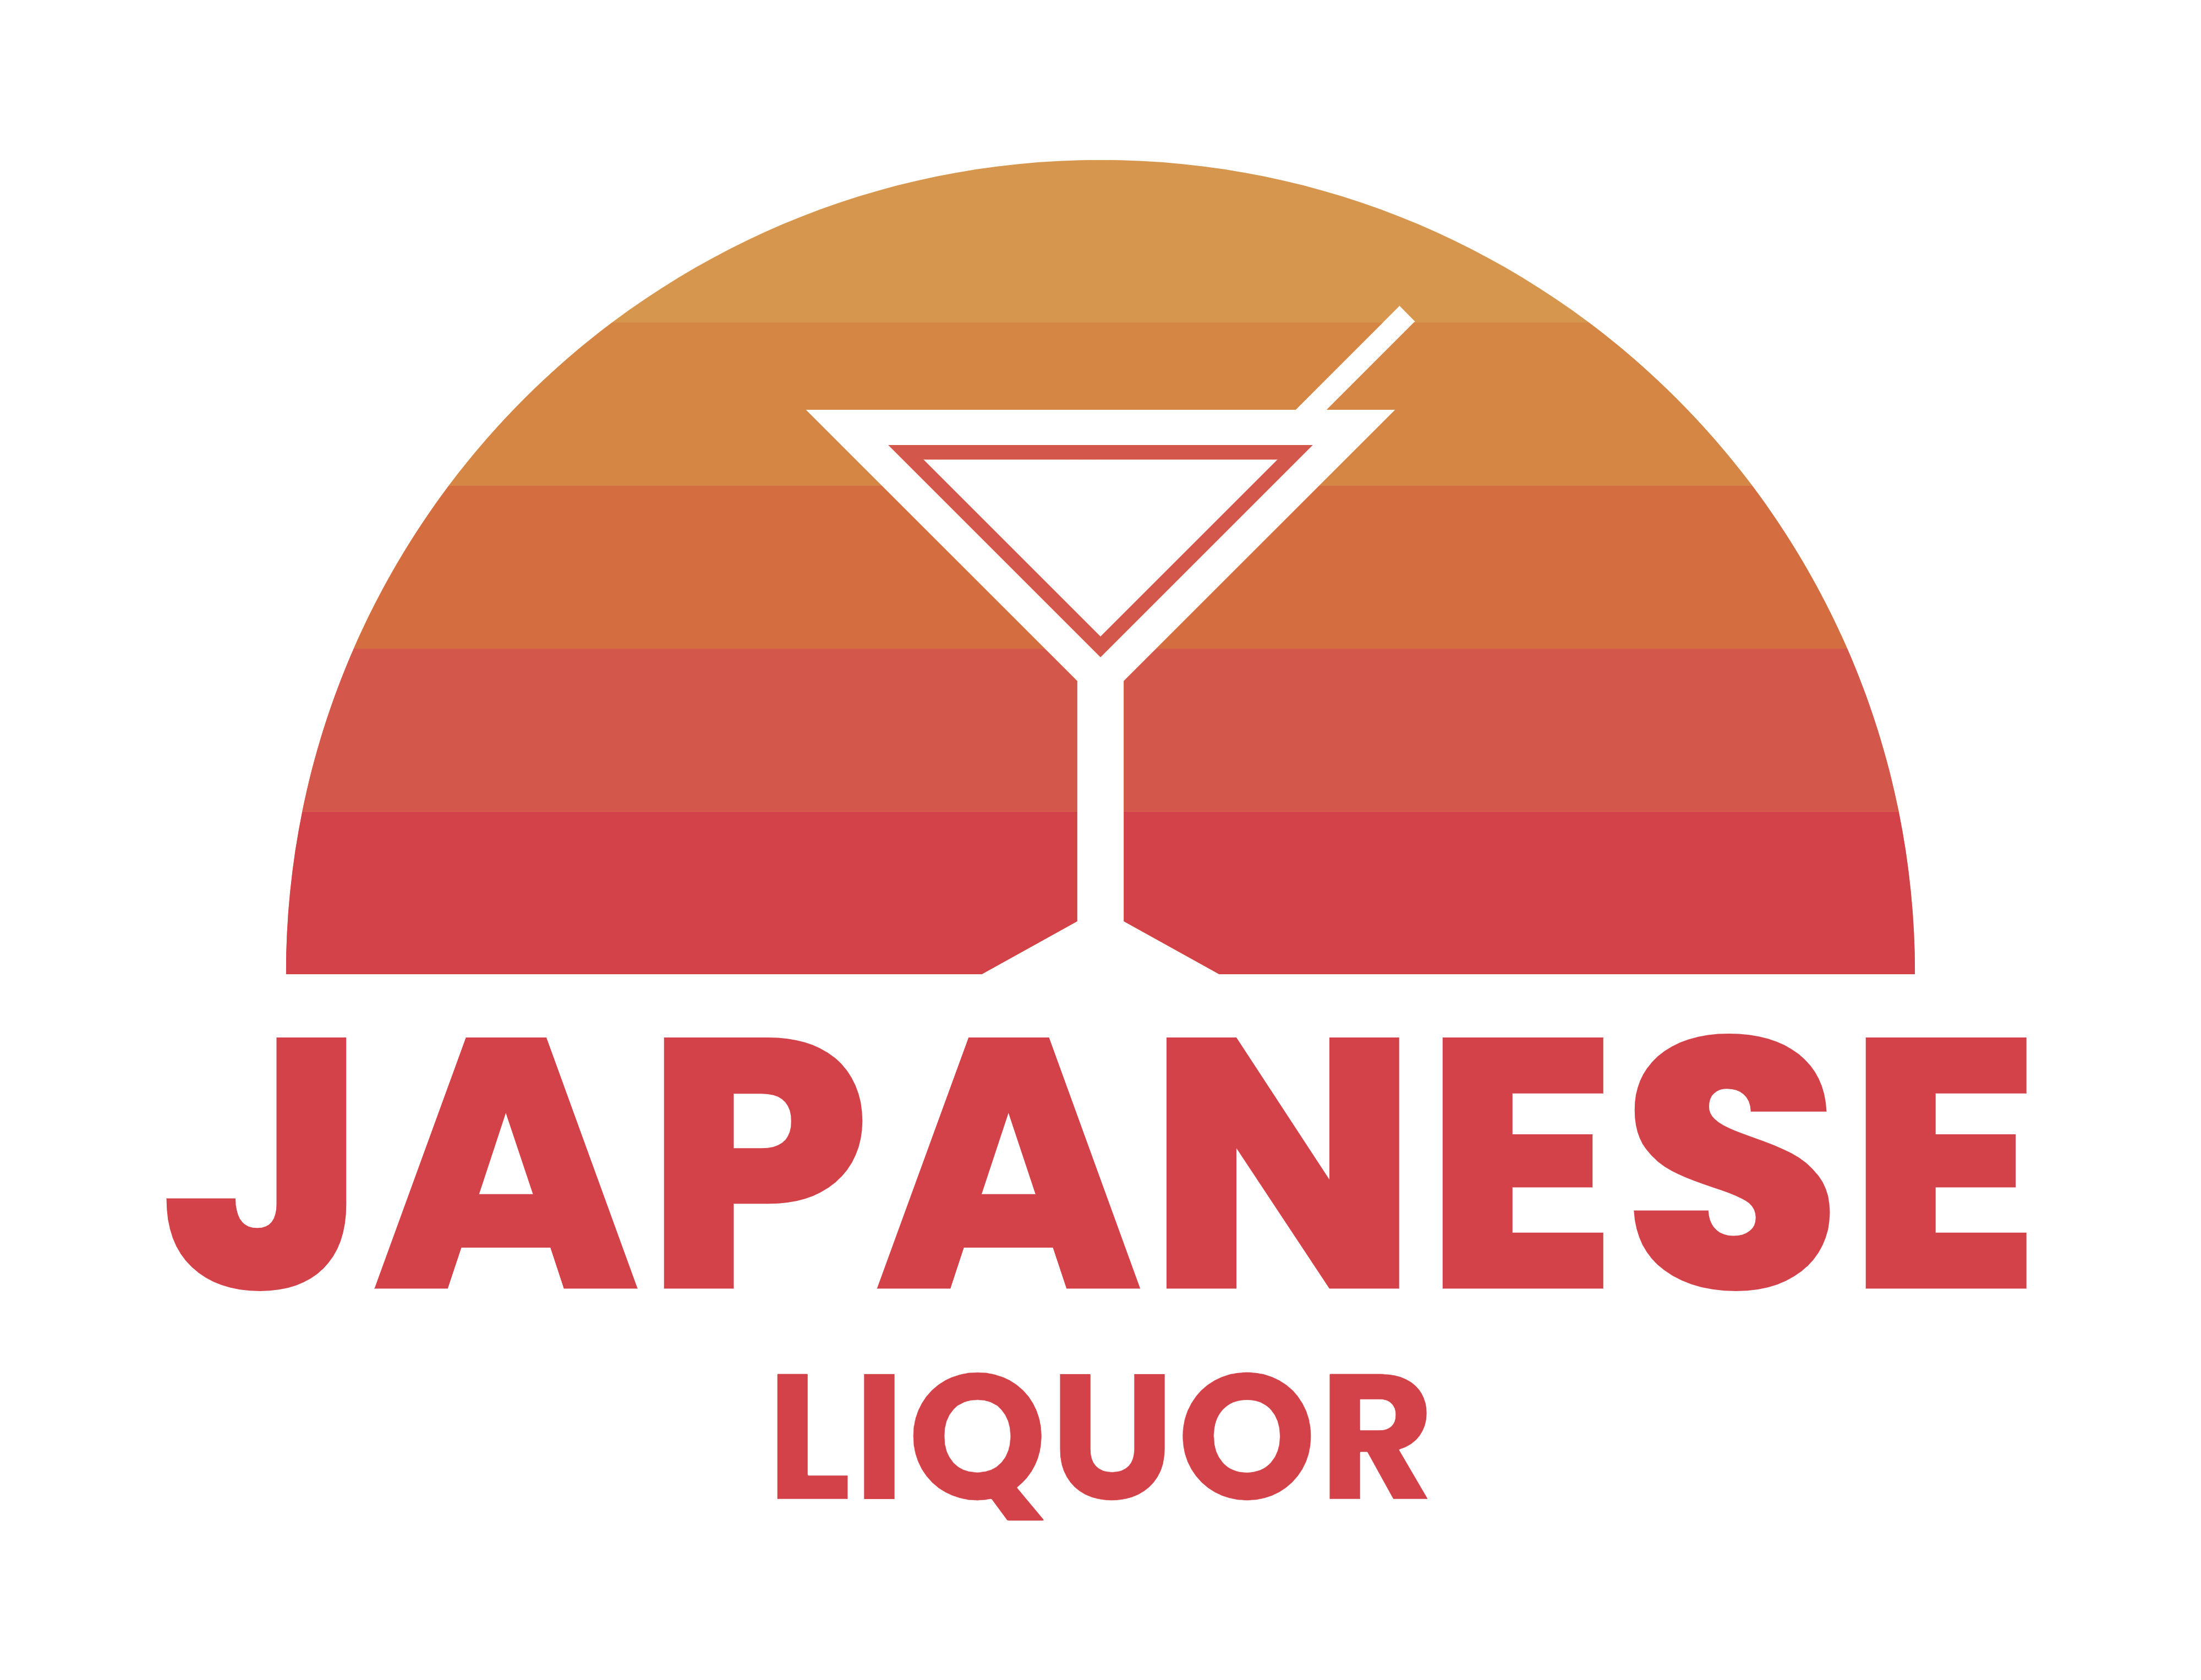 JAPANESE LIQUOR | Guide to Japanese Alcoholic Beverages